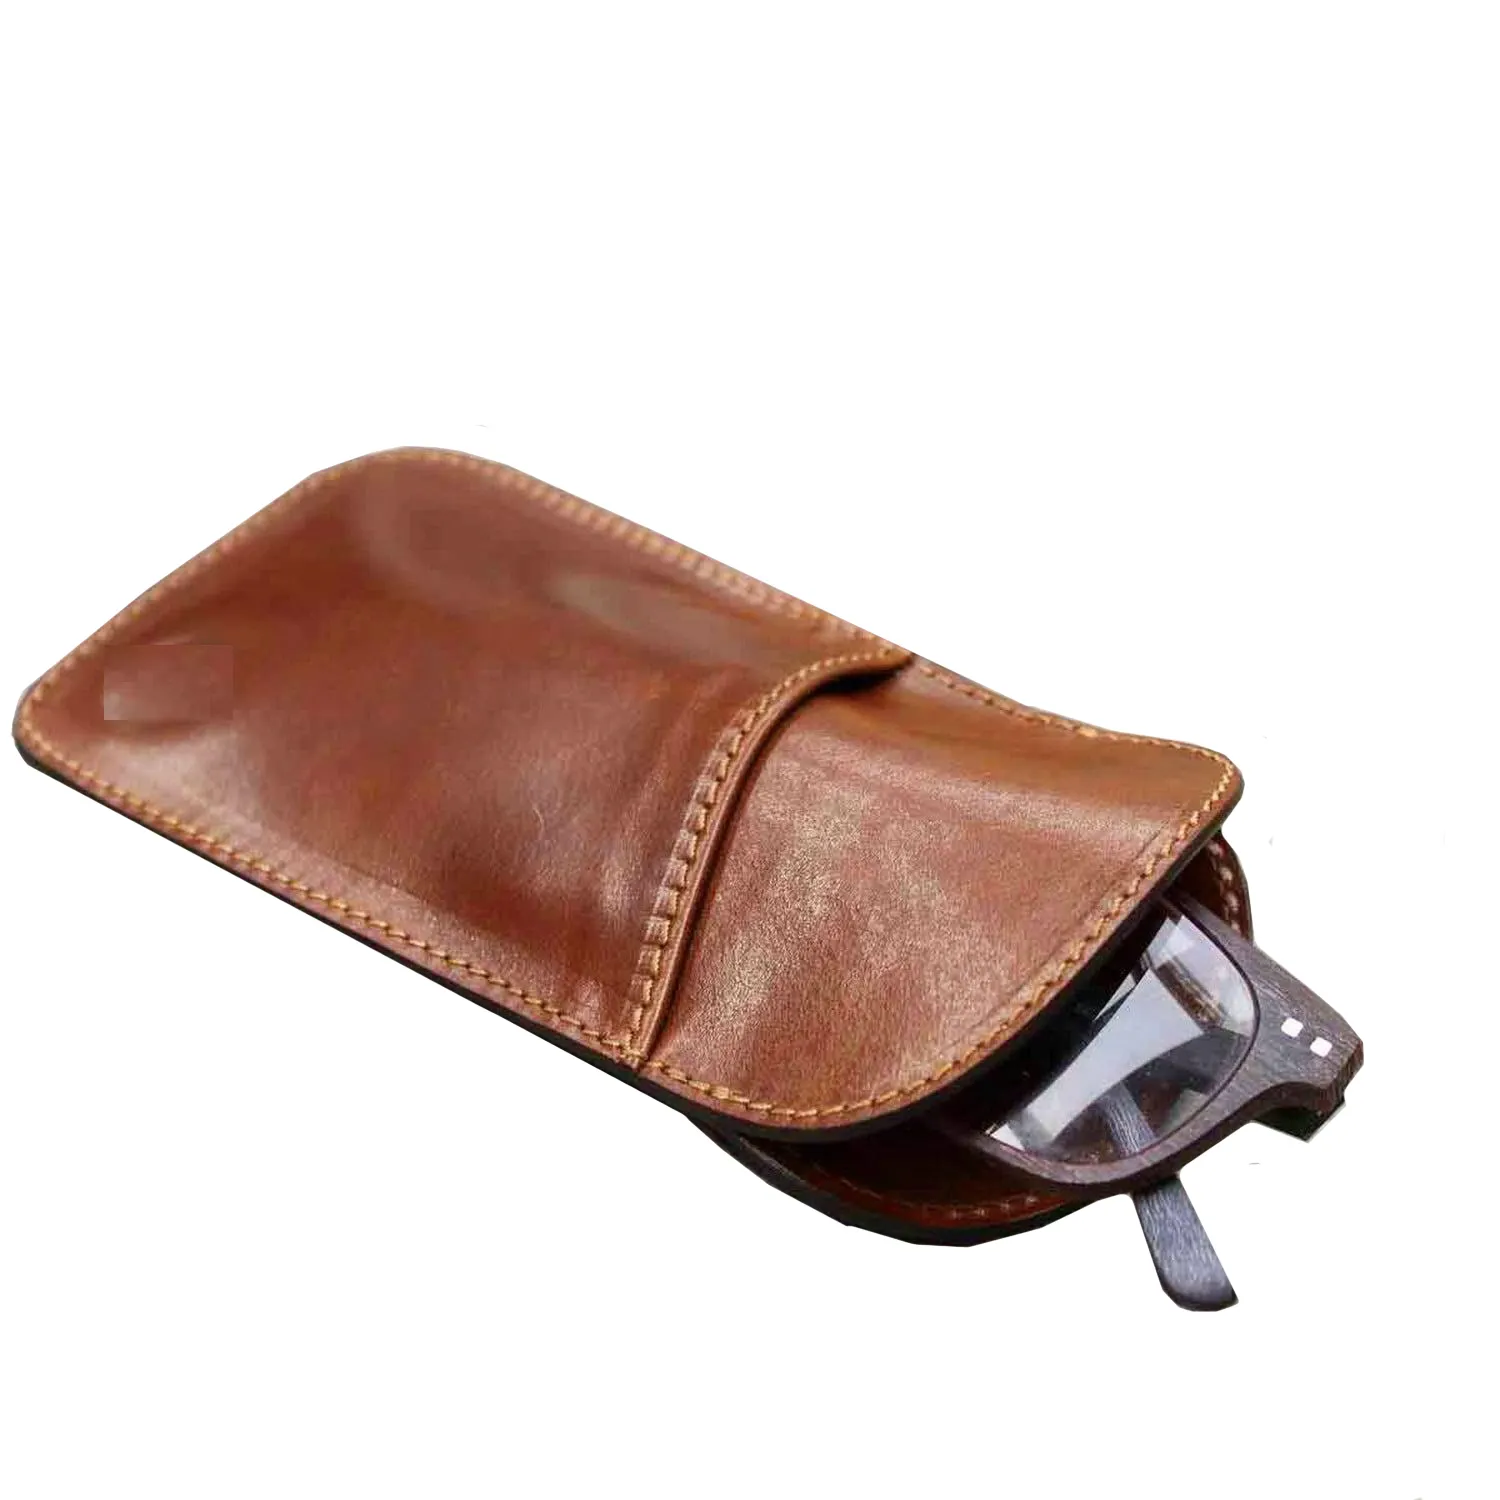 High Quality Genuine Leather Eyeglass Case With Top Load Style, Hold 1 Eyeglass In Brown Color At Best Price